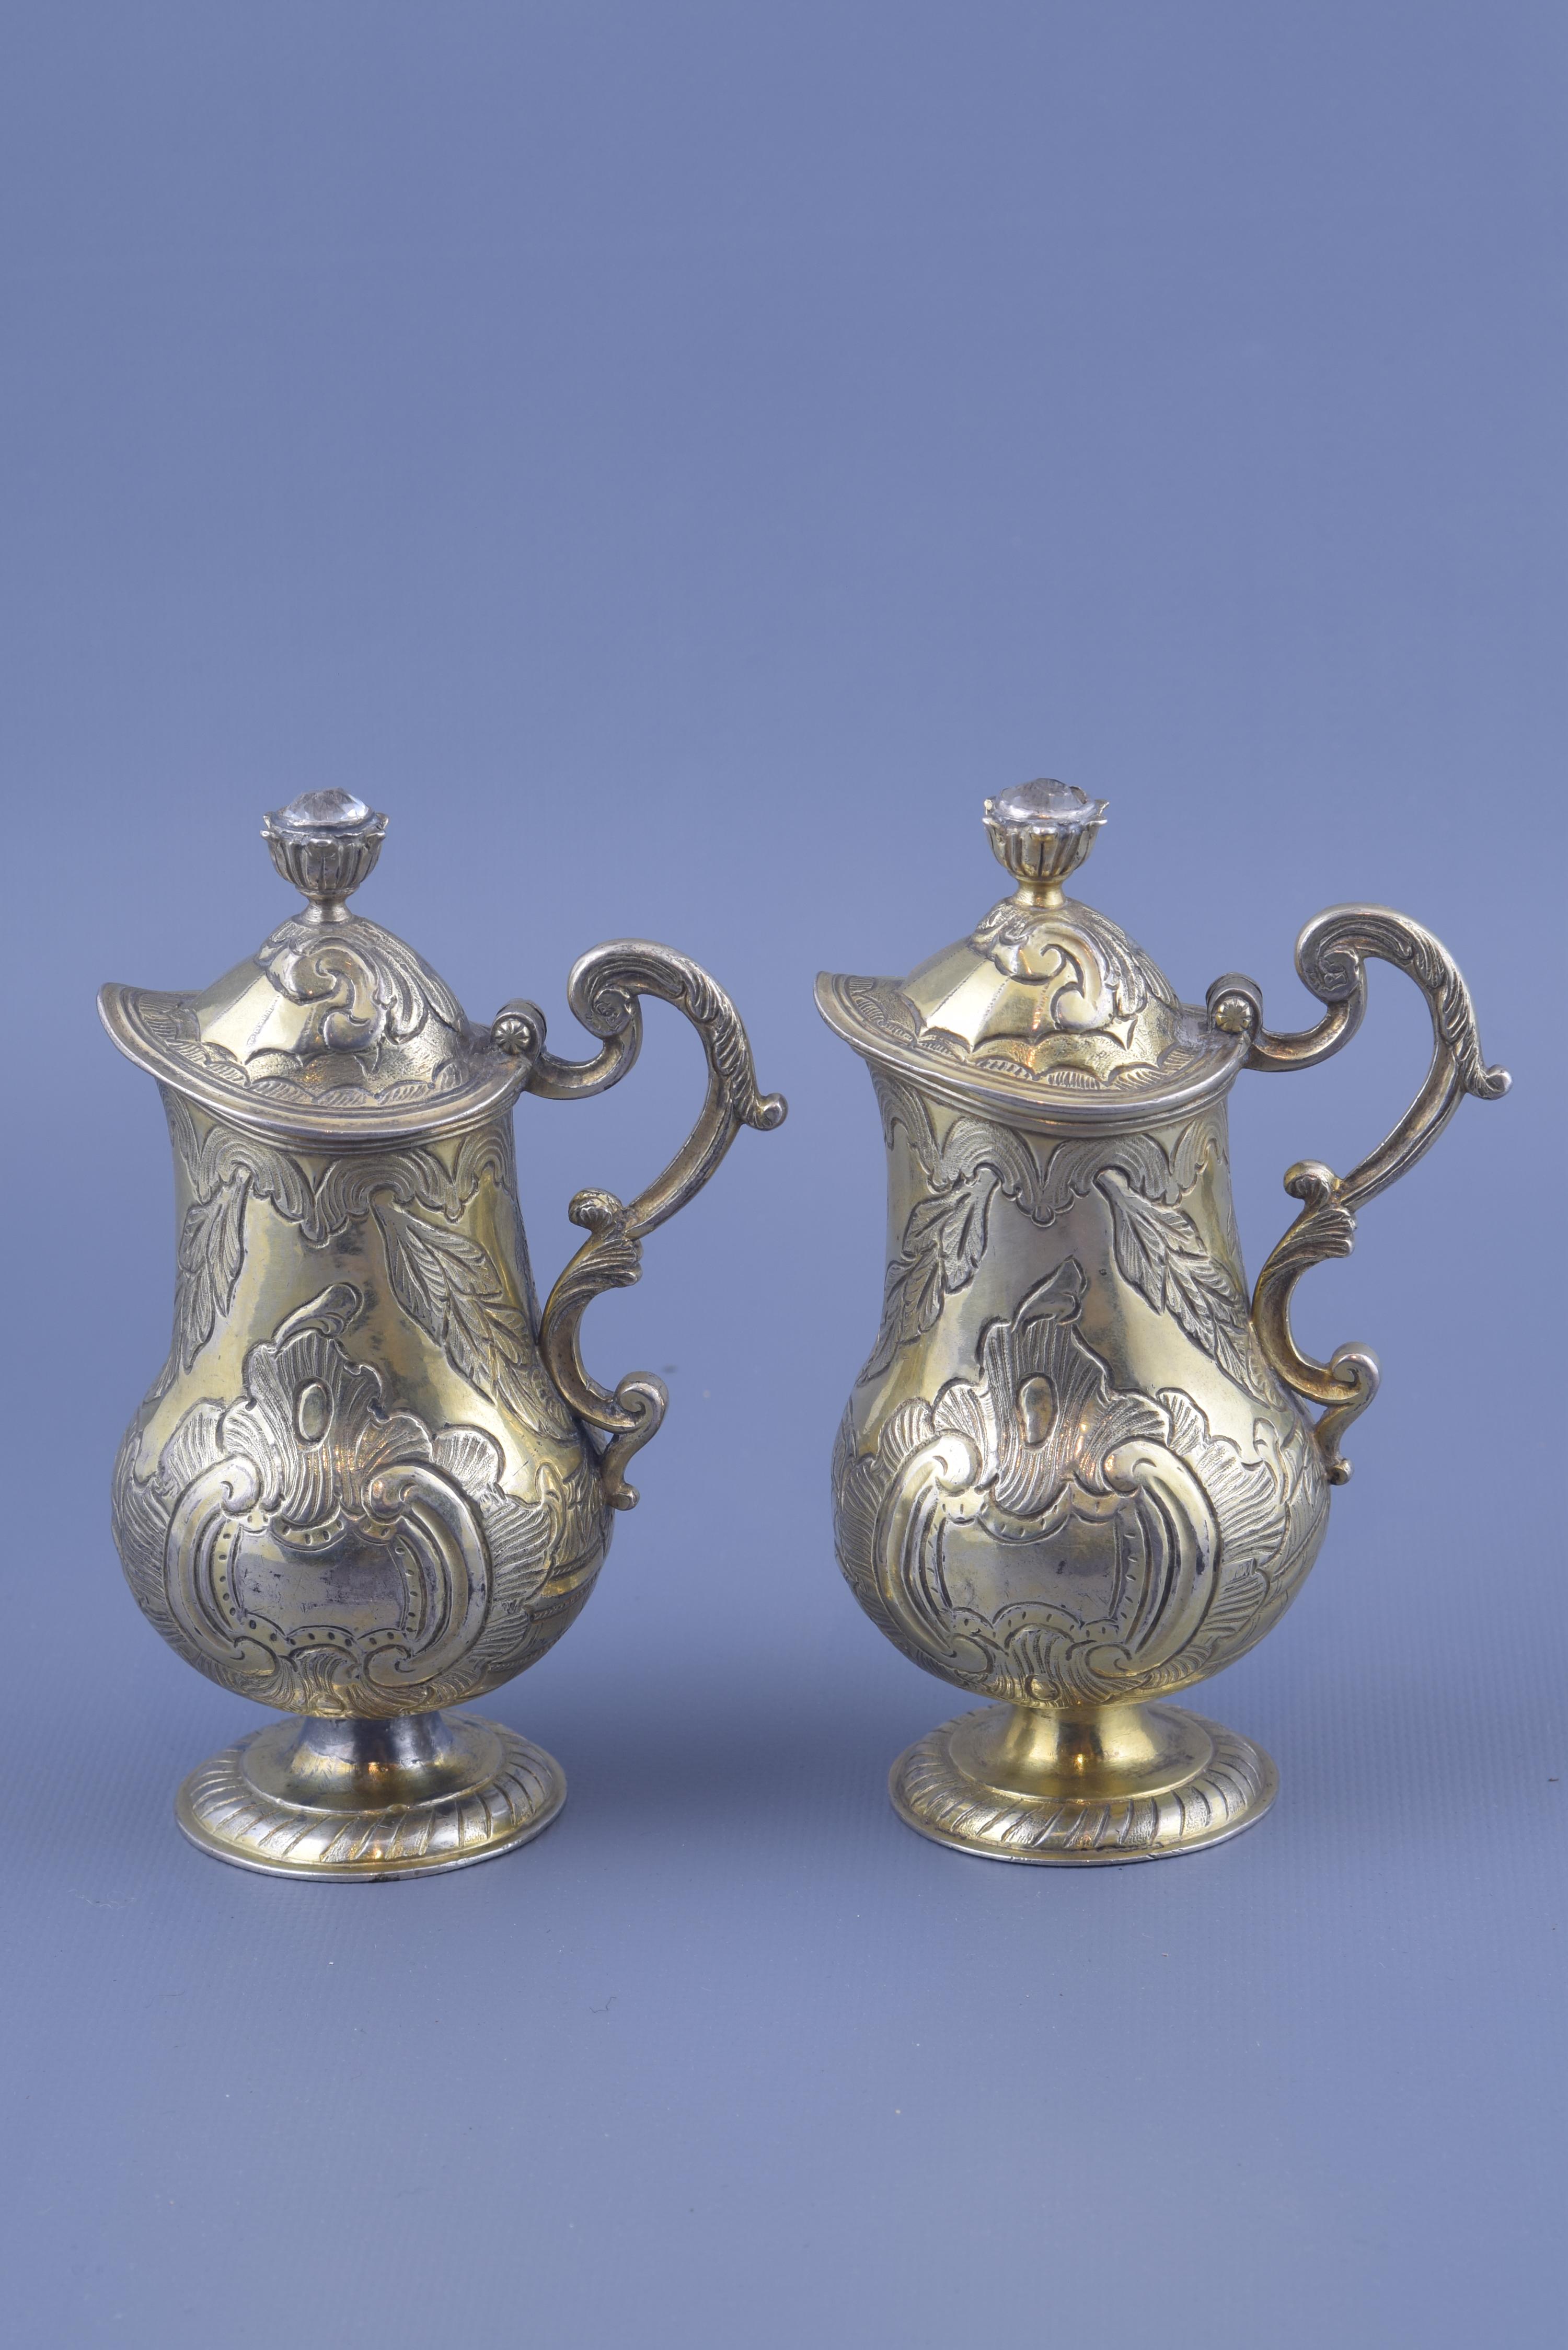 Pair of jars with lid and handle made in silver gilt. A circular base (decorated with moldings and lines parallel to each other) gives way to a smooth foot, from which arises the body of the piece (circular in its lower area and tubular in the